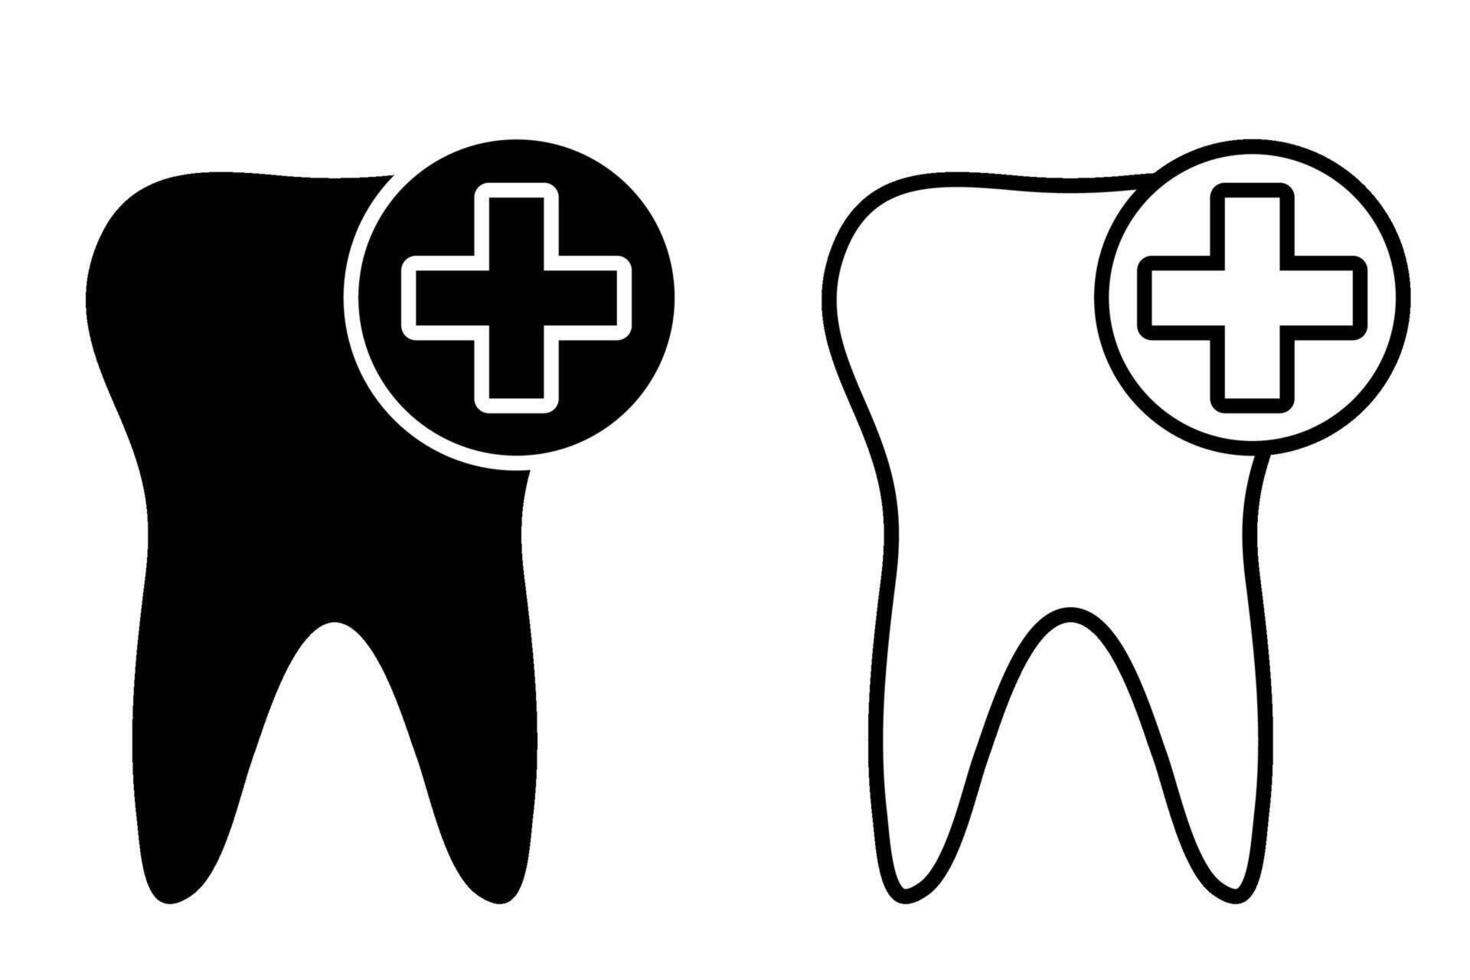 Tooth icon. Dental concept. Basic simple design vector